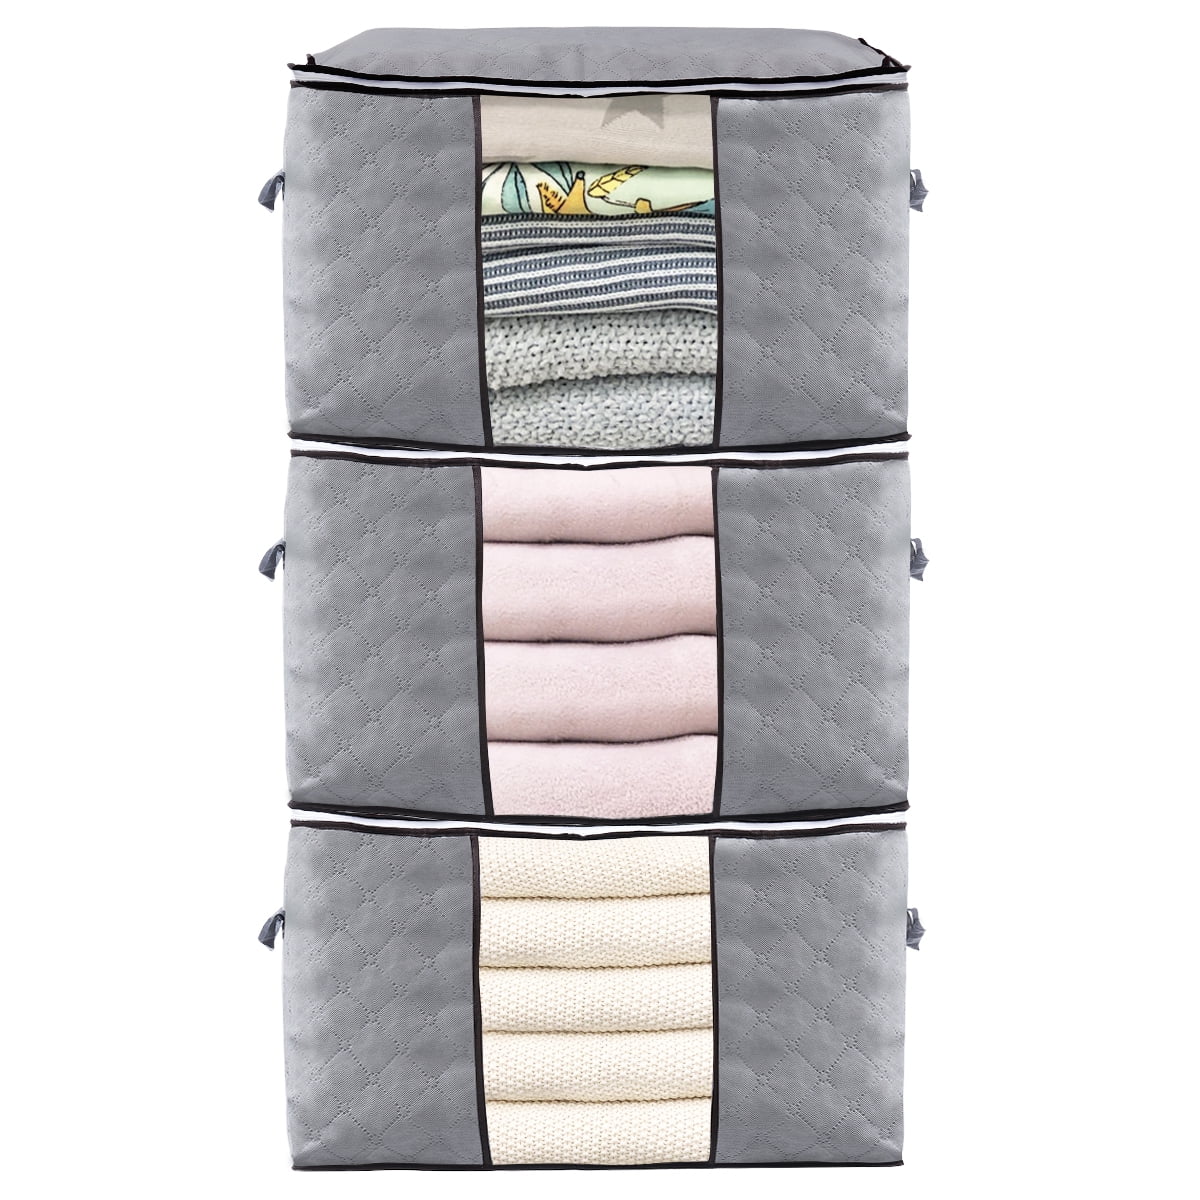 Sturdy Zipper 3 Pack Lifewit Foldable Clothes Storage Bag 90L Large Capacity Organizer with Reinforced Handle Thick Fabric for Comforters Bedding Grey Clear Window Blankets 